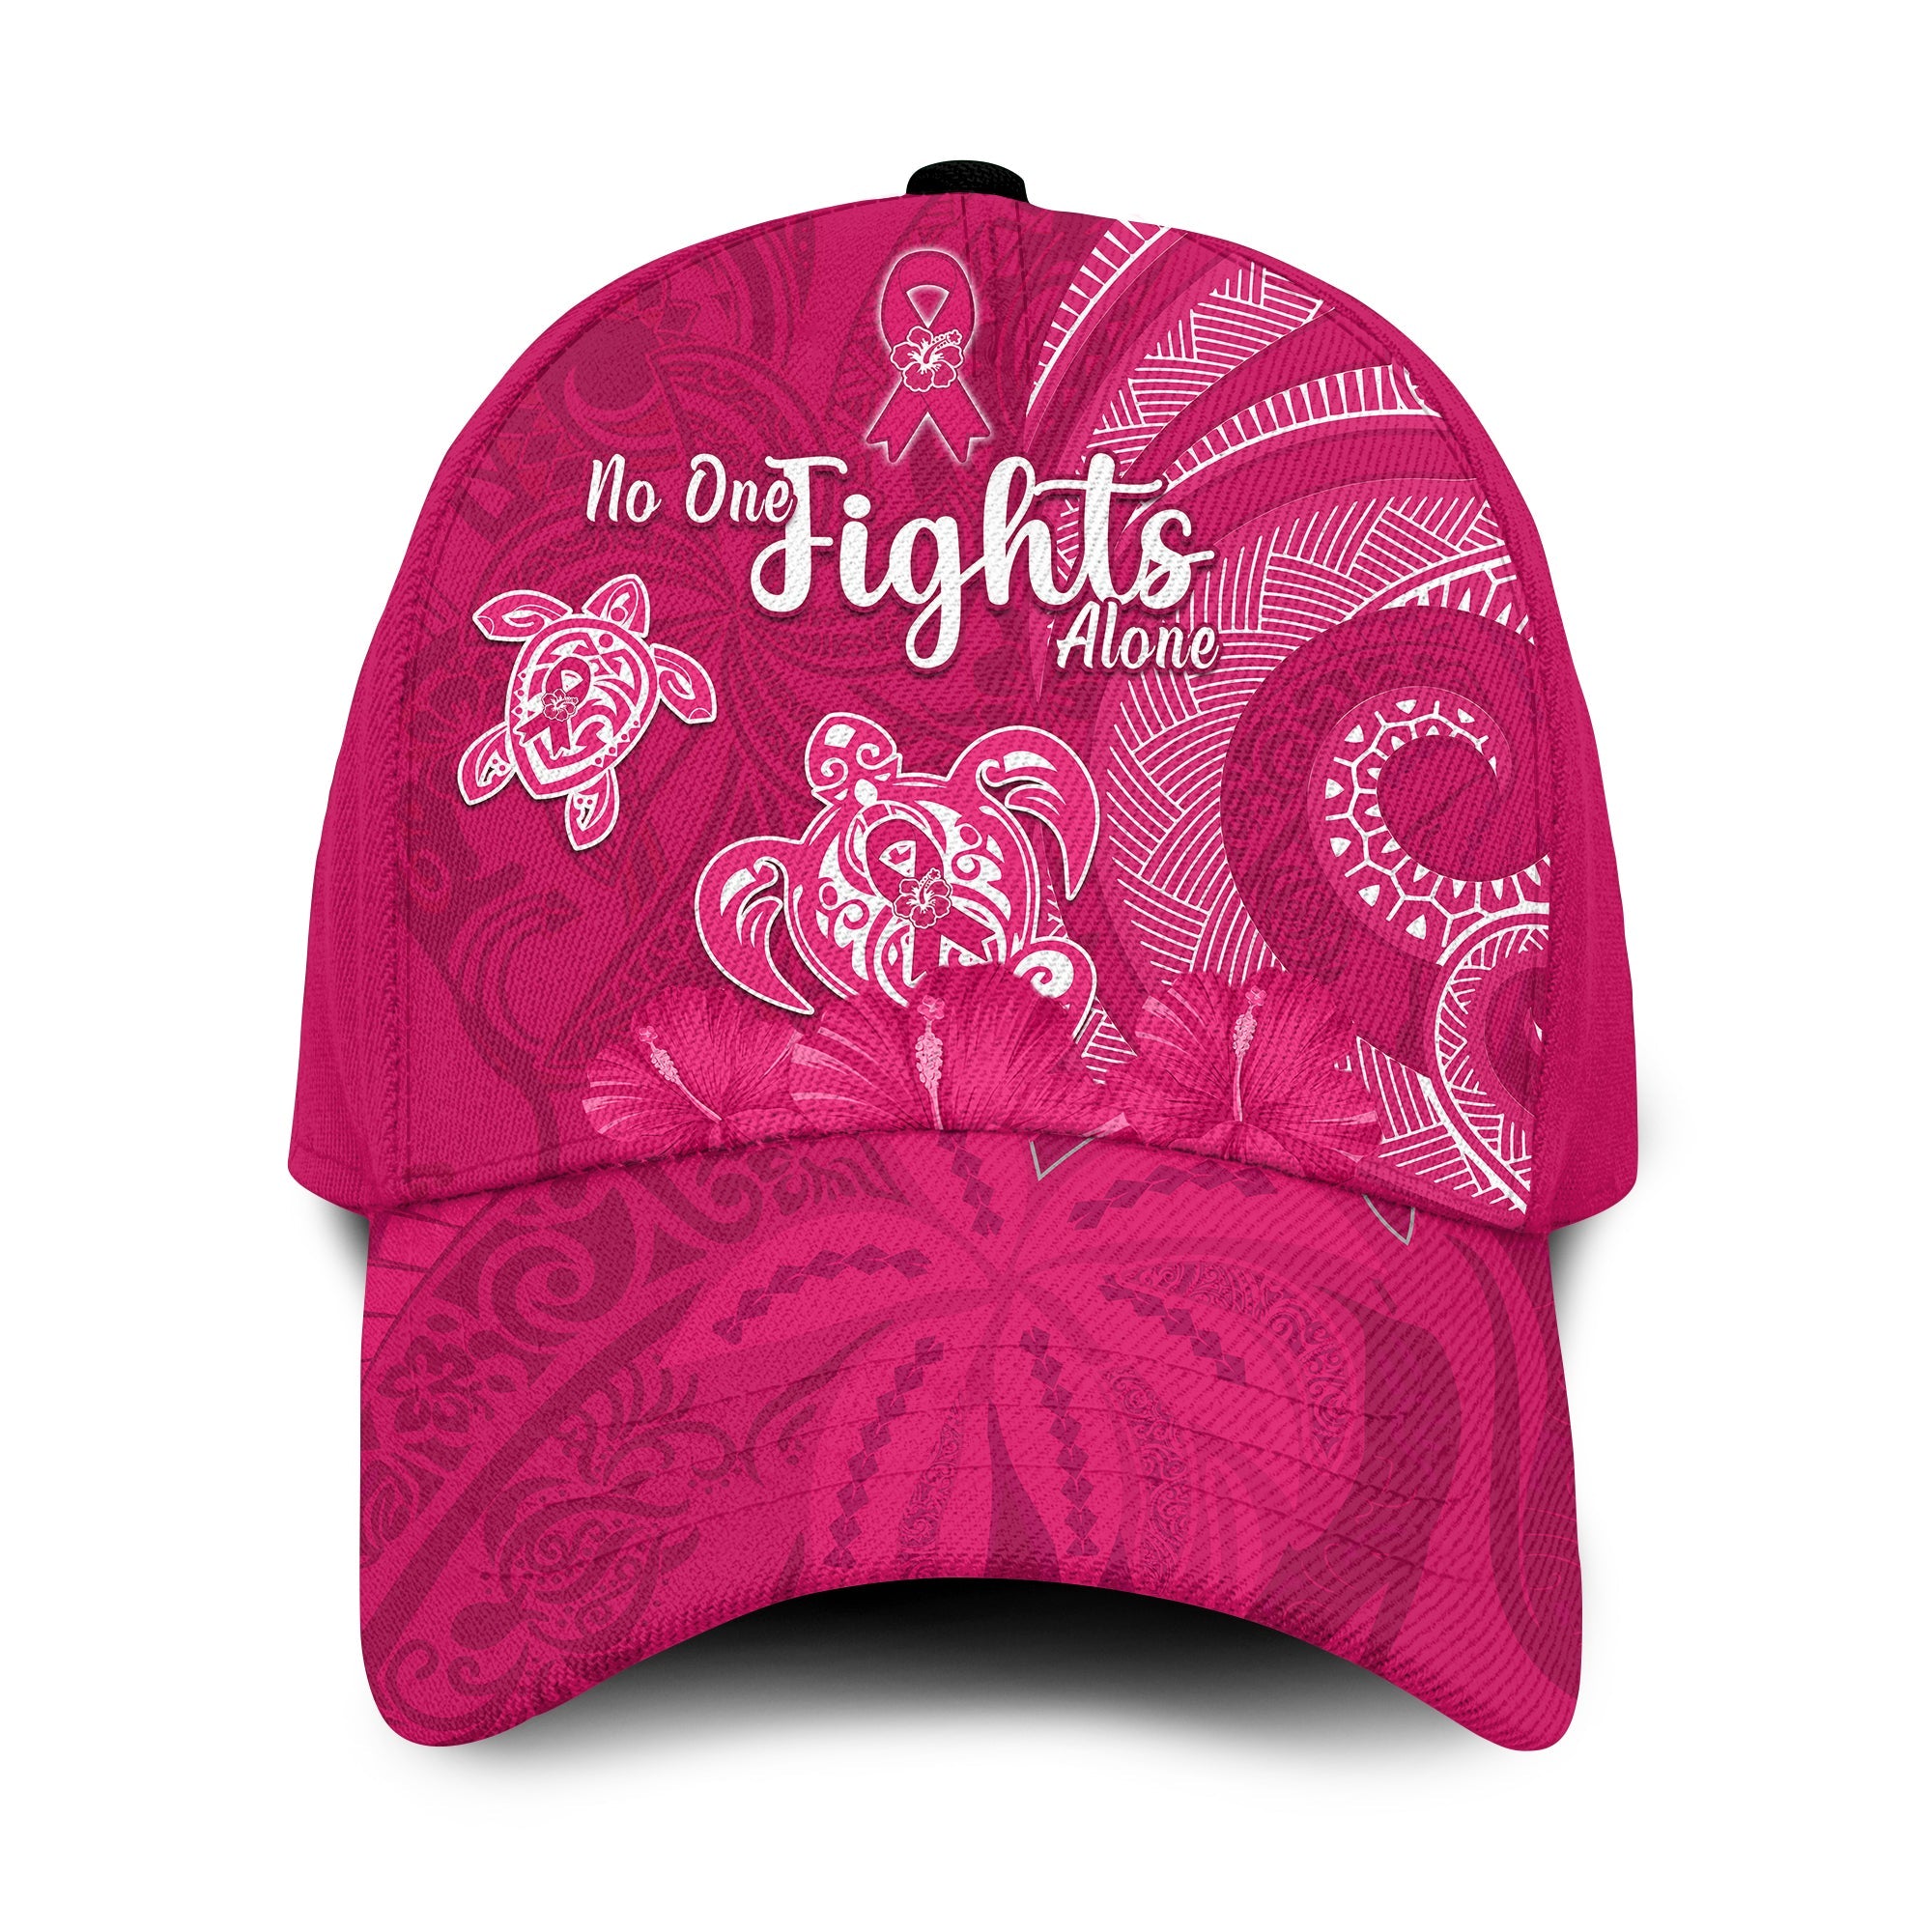 Breast Cancer Awareness Classic Cap Hibiscus Polynesian No One Fights Alone Ver.01 LT13 Classic Cap Universal Fit Pink - Polynesian Pride